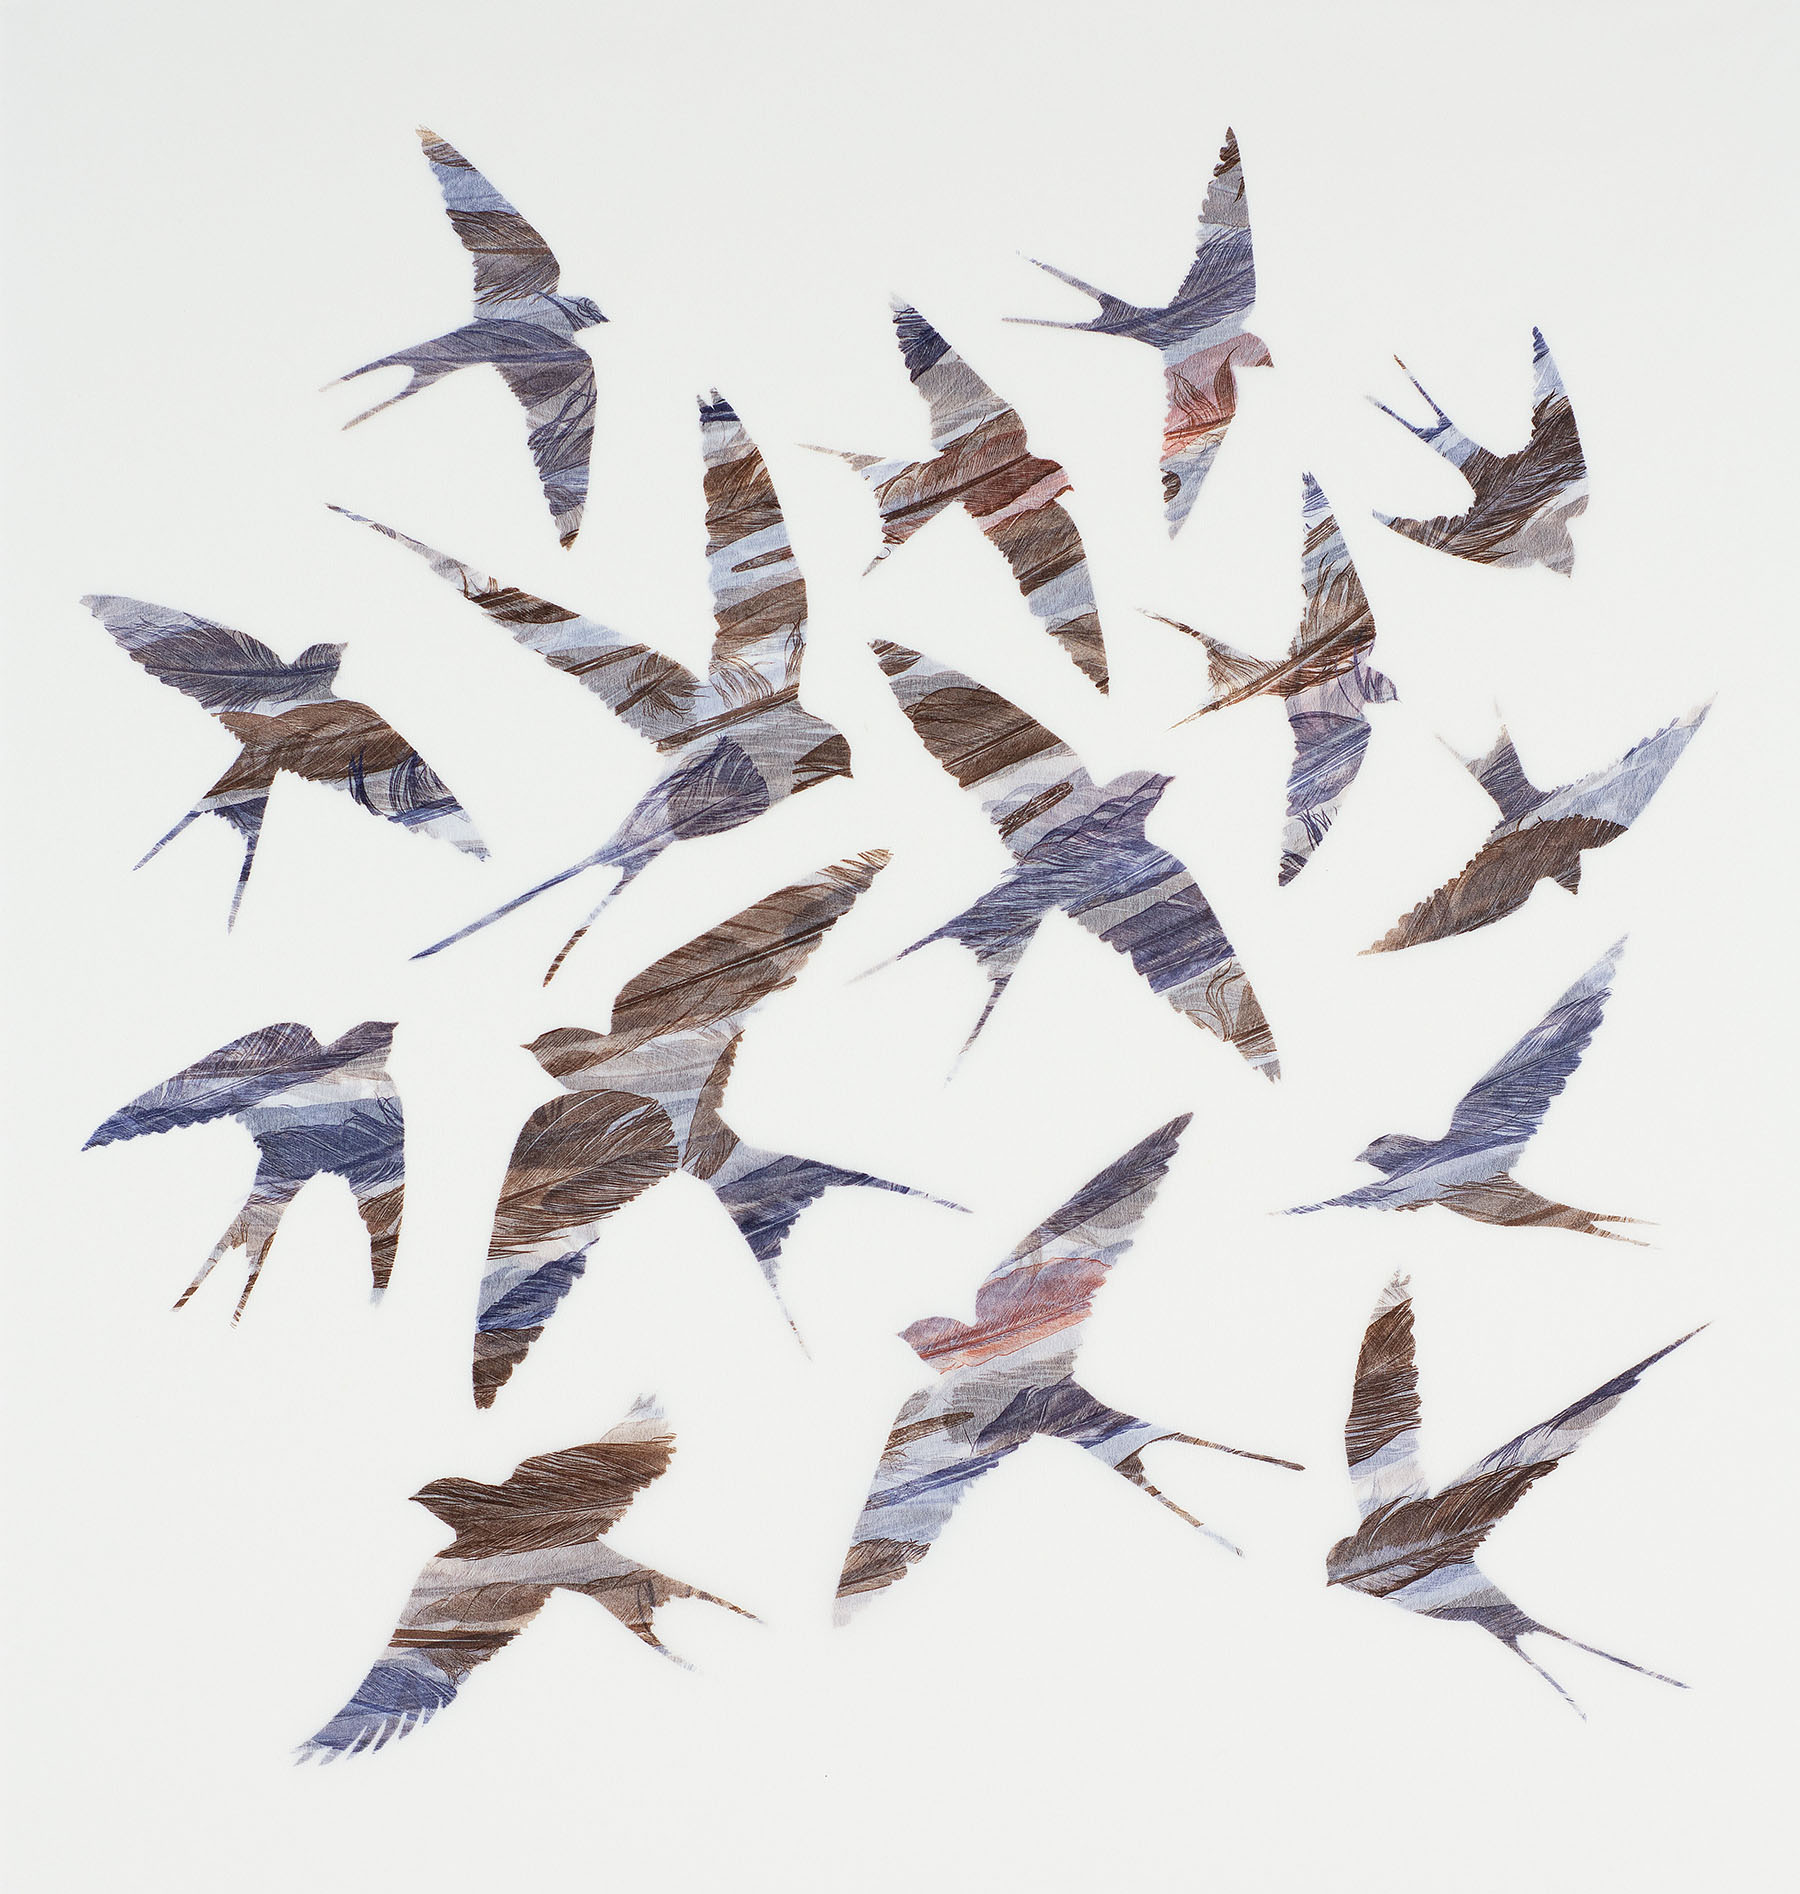 Ruth Thomas, As Swift As Swallows Fly. Original print from feathers and stencil on Japanese paper. 50 cm x 50 cm. ©2019 Ruth Thomas. Courtesy of the Makers Guild in Wales.